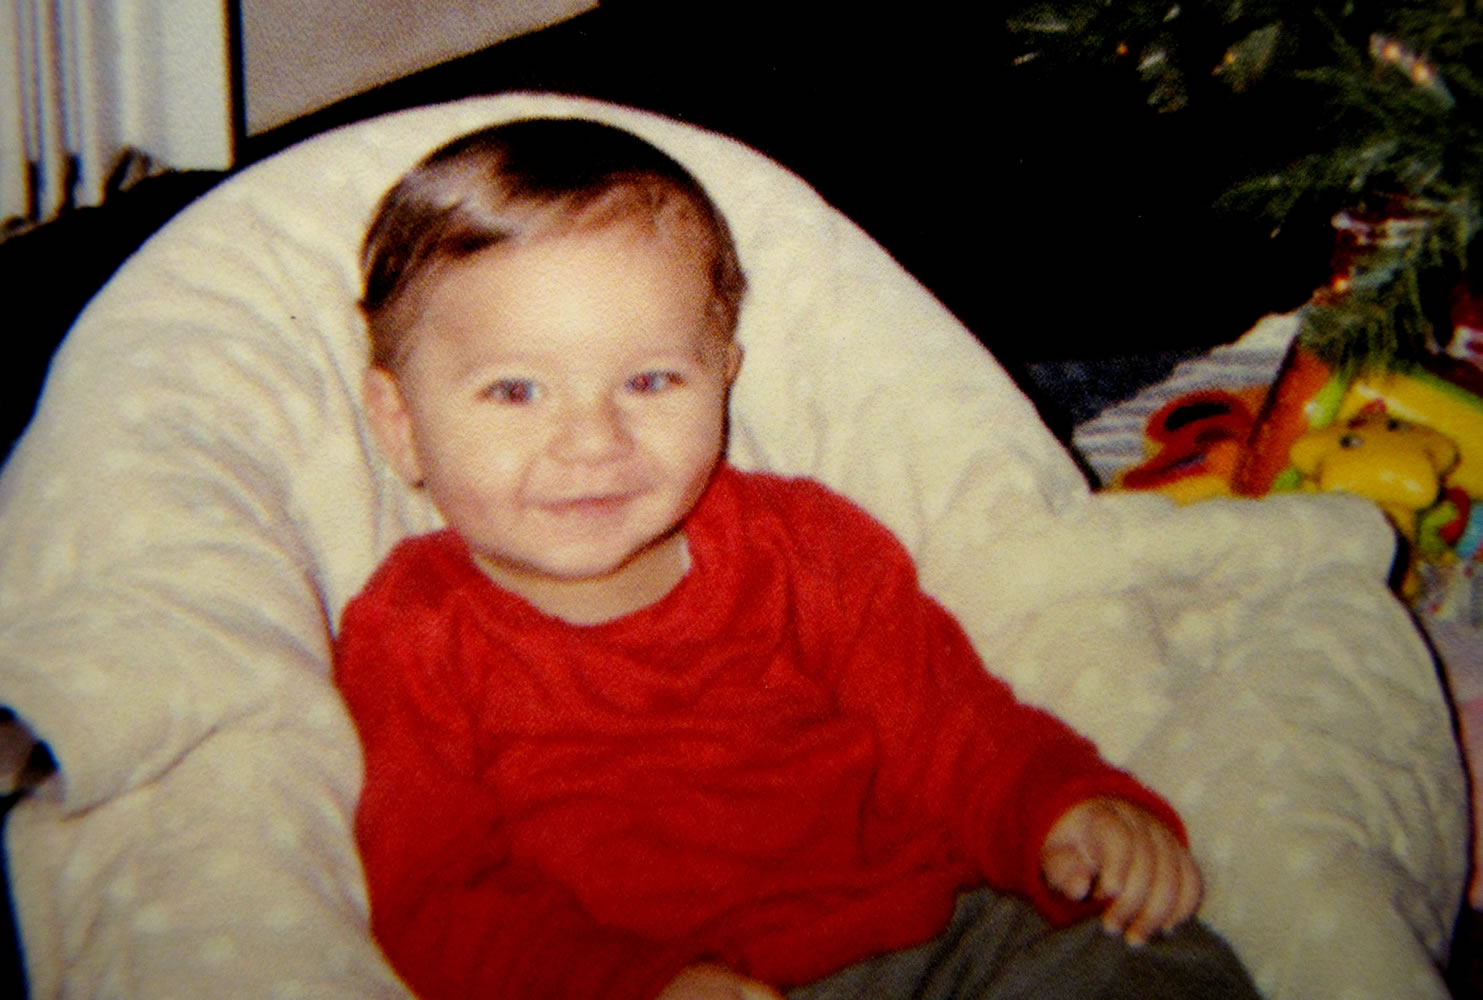 This photo provided Friday by Sherry West, of Brunswick, Ga., shows her son Antonio Santiago celebrating his first Christmas in December of 2012. West says a teenager trying to rob her at gunpoint Thursday asked &quot;Do you want me to kill your baby?&quot; before he fatally shot 13-month-old Antonio in the head. West was walking with Antonio in his stroller near their home in coastal Brunswick.